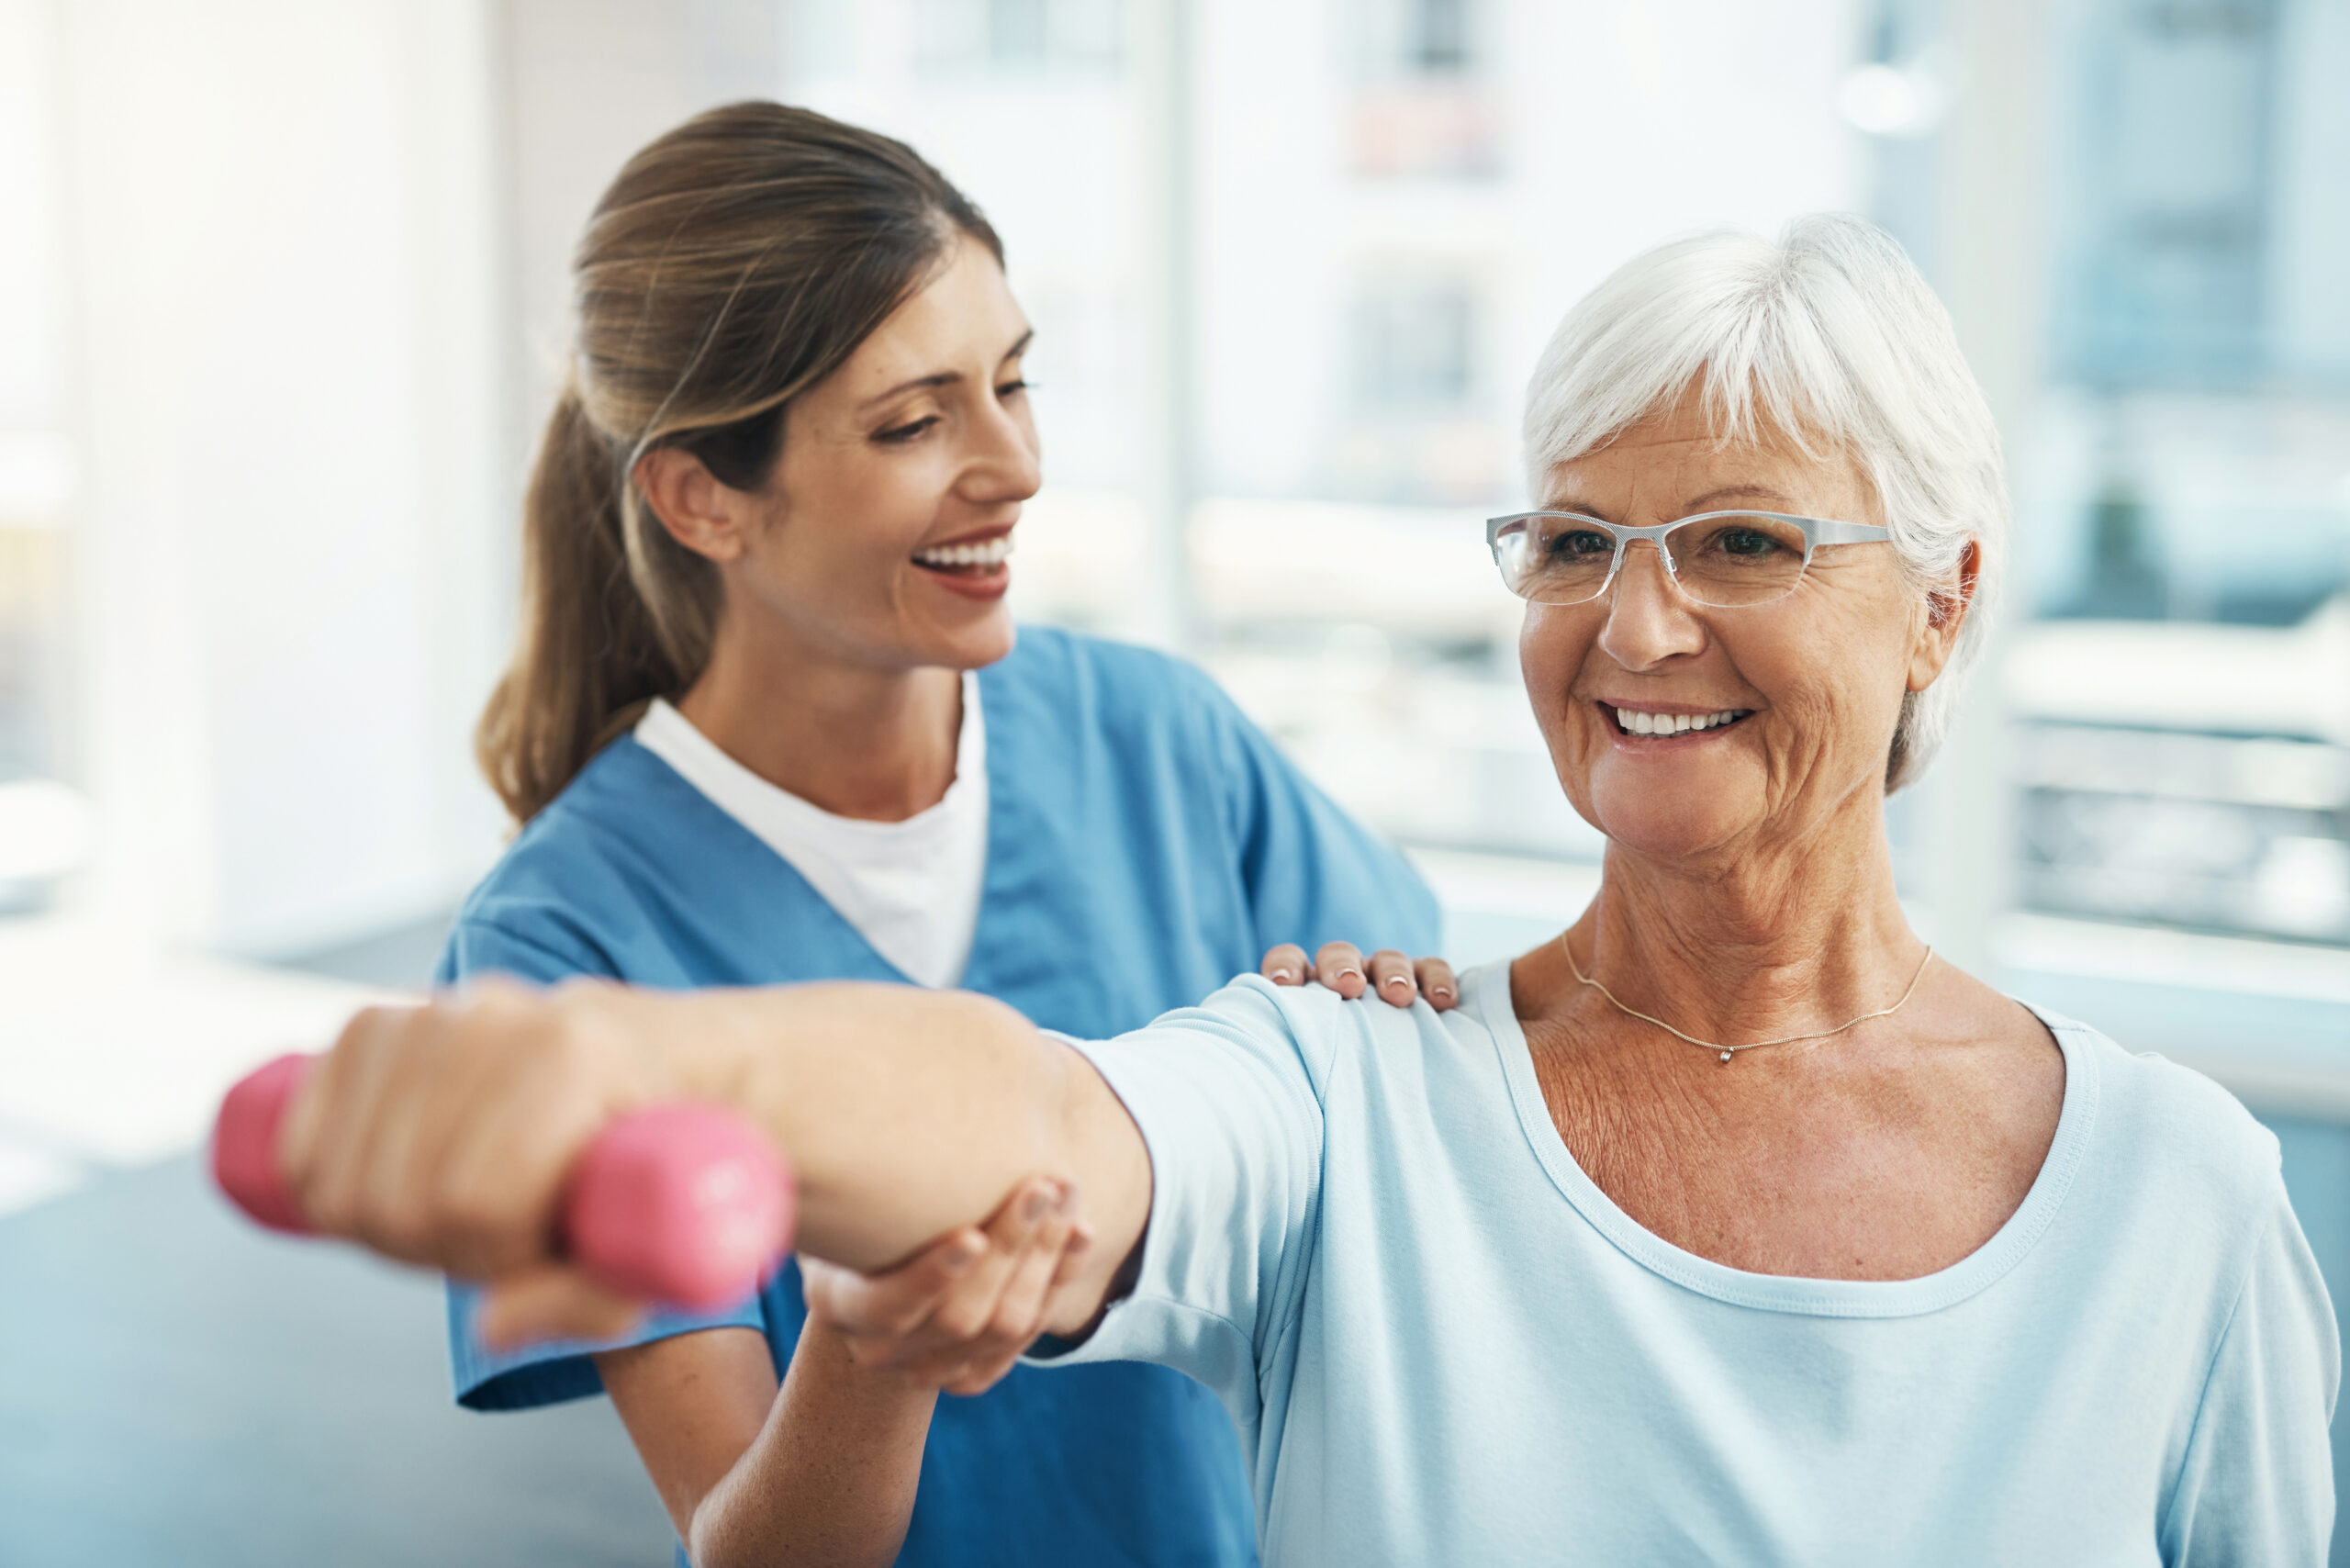 Senior woman, doctor and helping in weightlifting for physical exercise or activity at the hospital. Happy nurse, therapist or physician assisting elderly lady in workout or training at the clinic